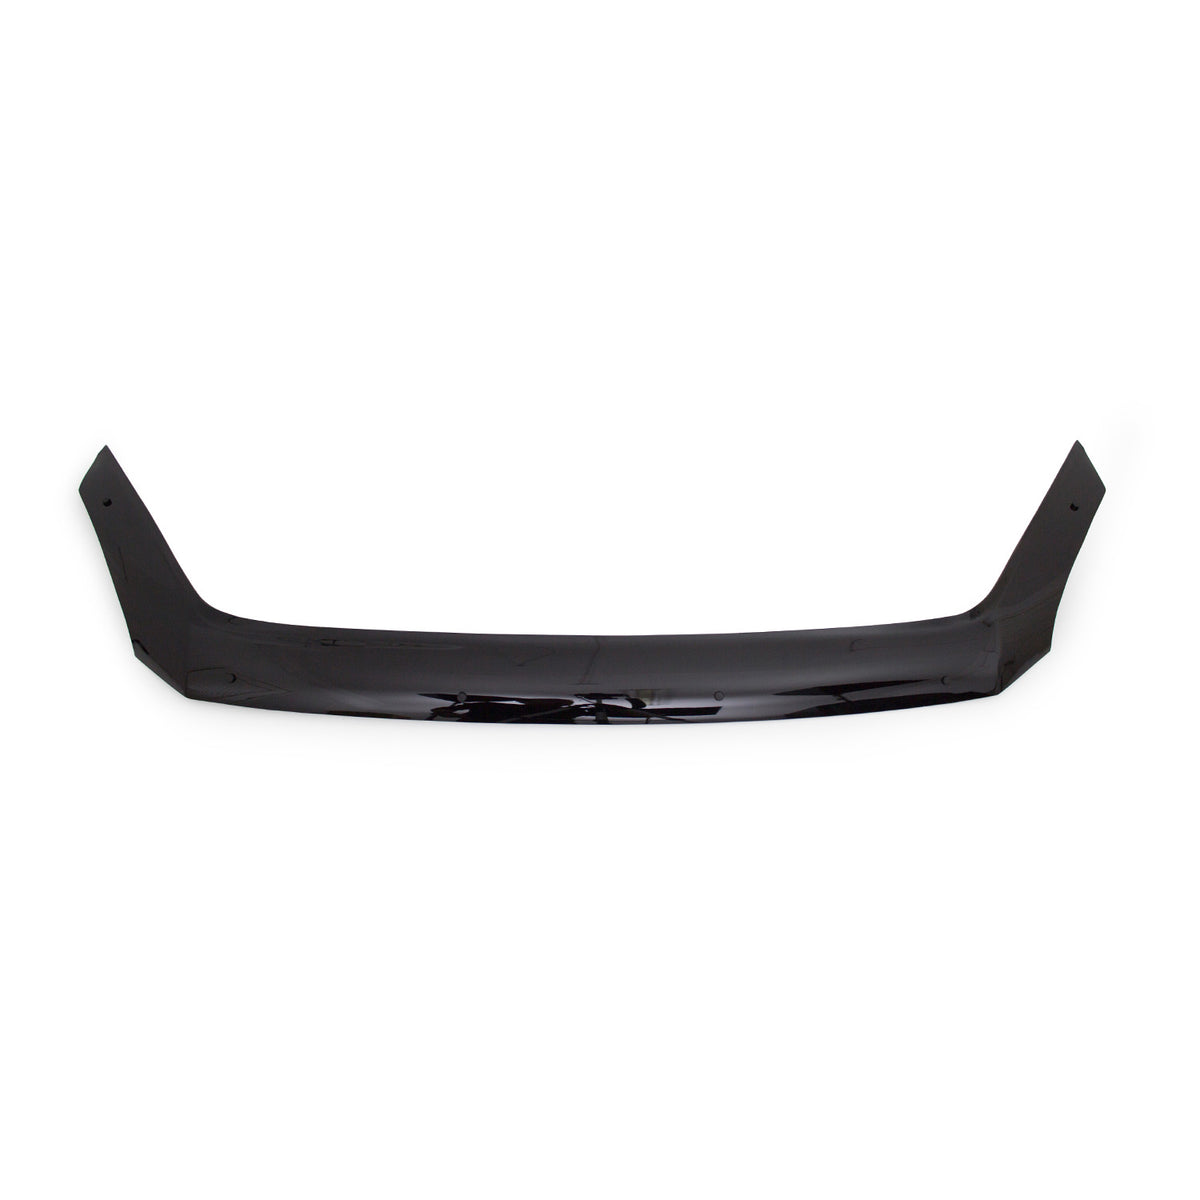 For VW Crafter 2006-2012 bonnet deflector insect and stone chip protection